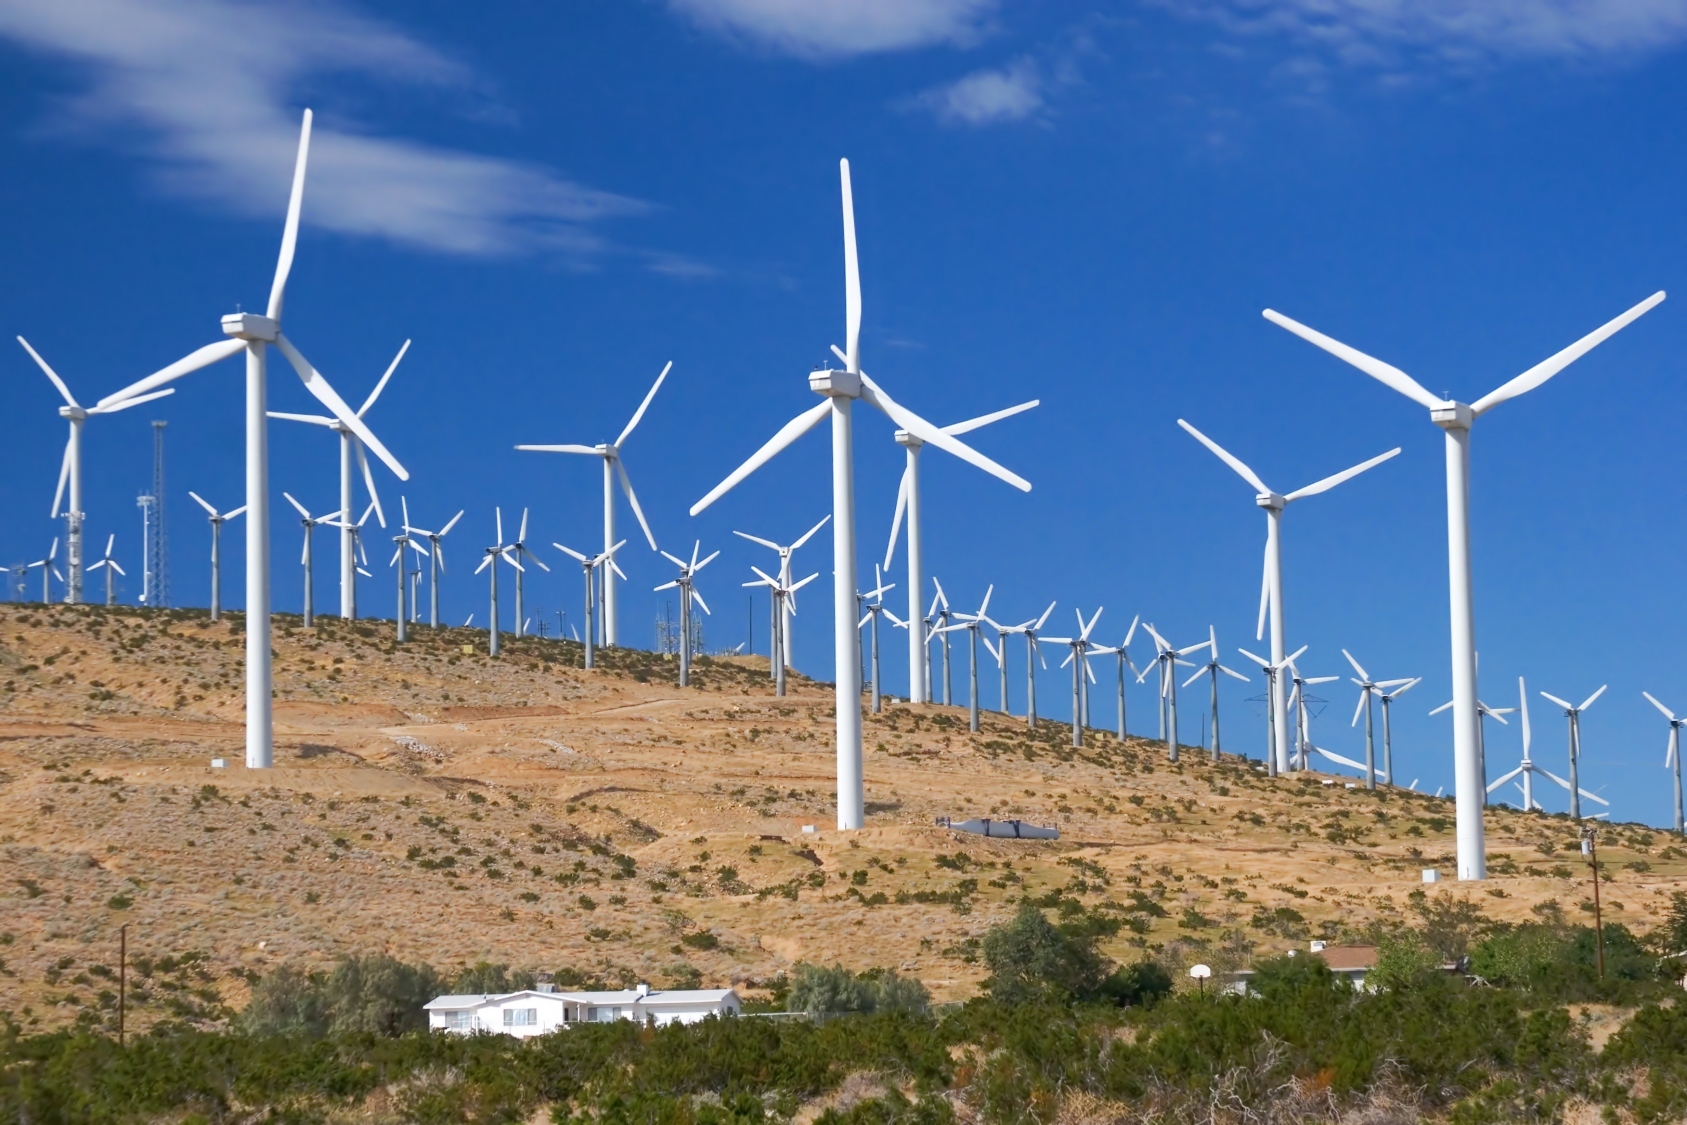 South Africa's Wesley-Ciskei wind power project set for construction